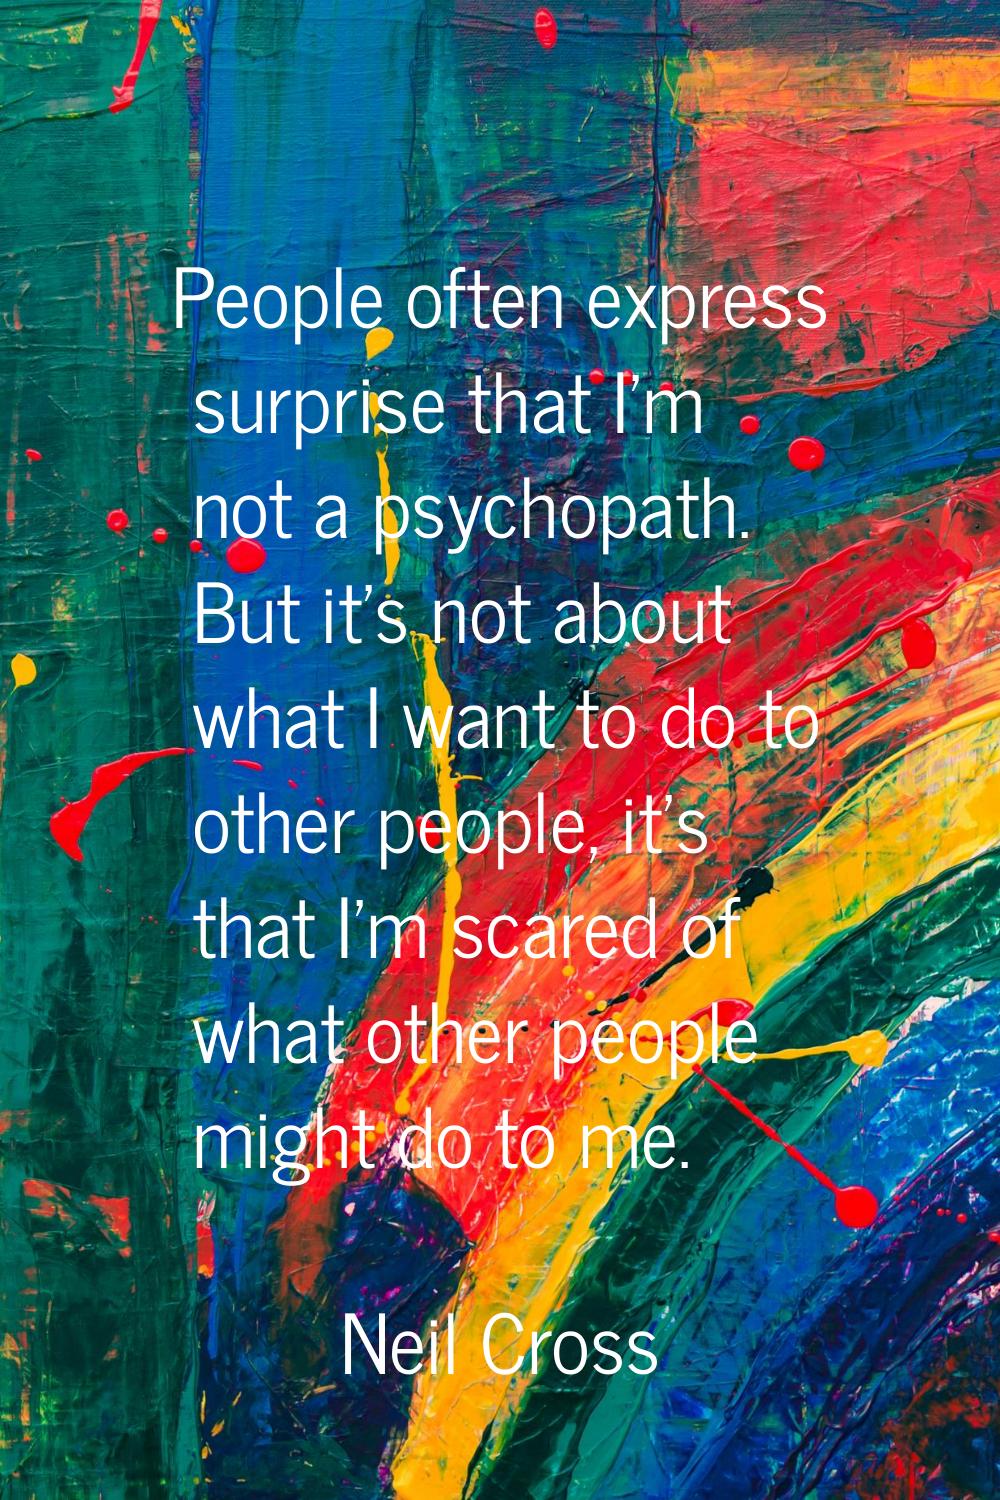 People often express surprise that I'm not a psychopath. But it's not about what I want to do to ot